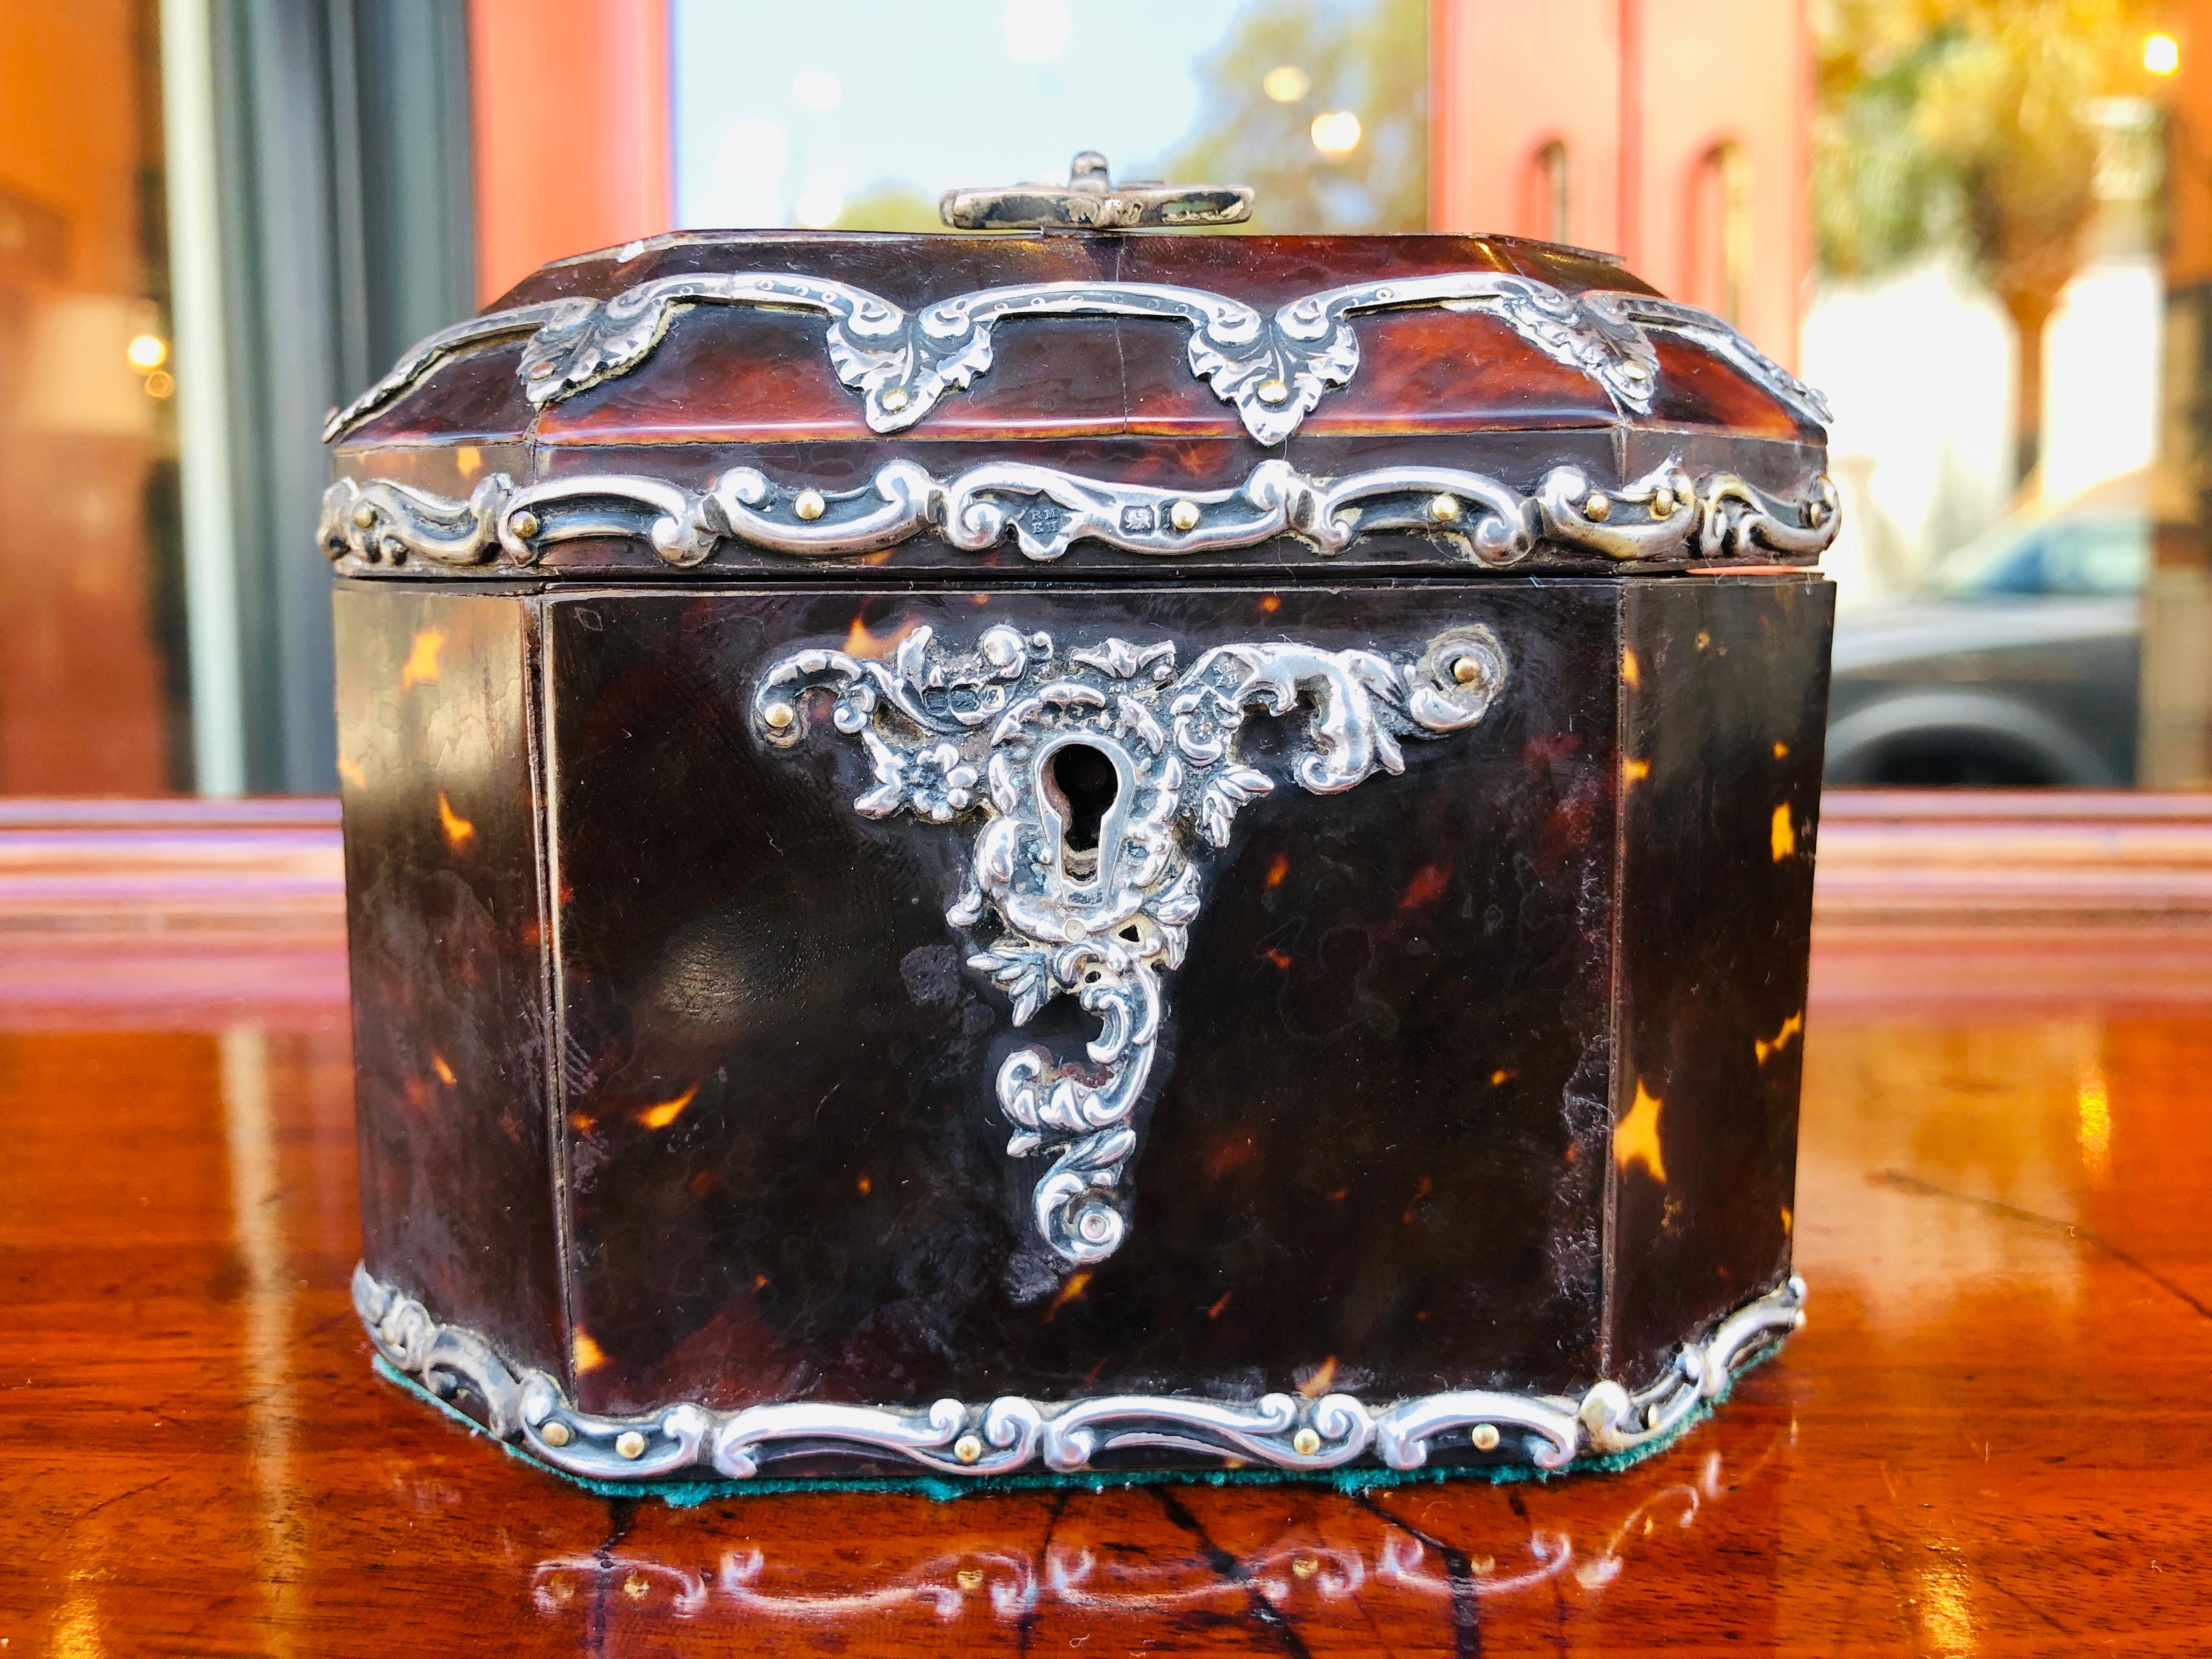 19th Century Diminutive English Tea Caddy of Tortoise Shell with Sterling Silver Mounts